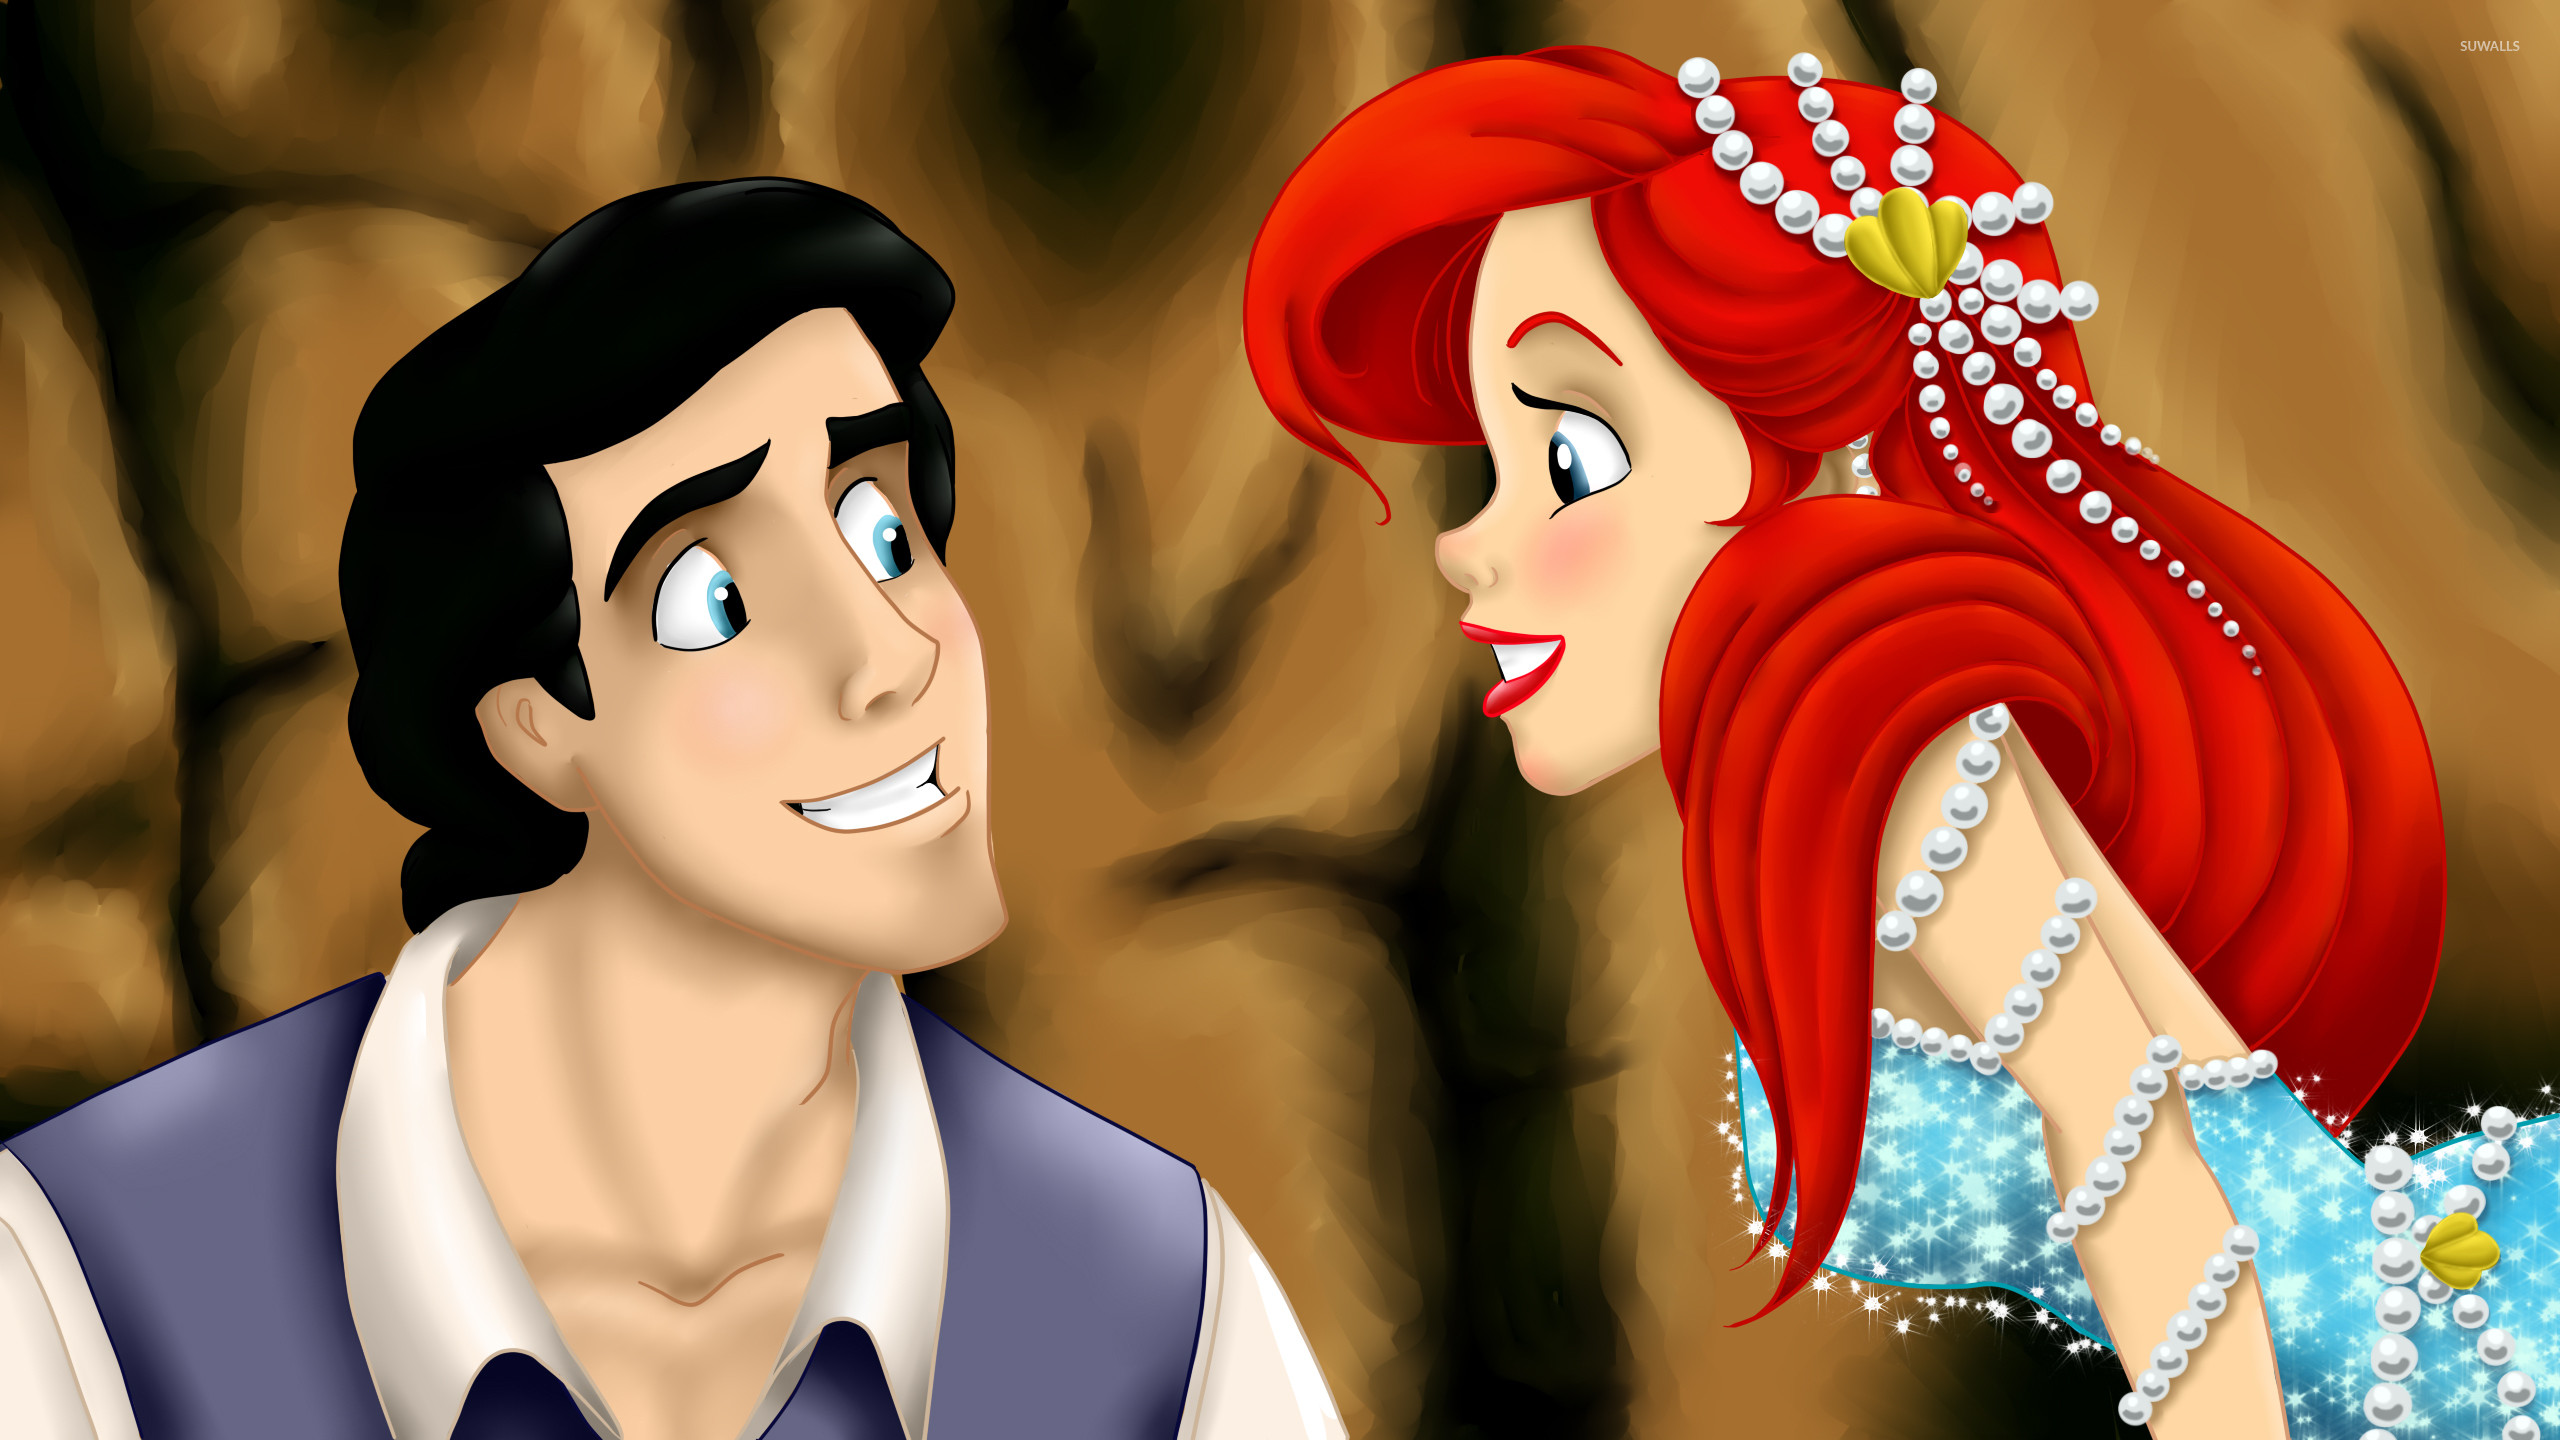 2560x1440 Eric and Ariel from The Little Mermaid wallpaper